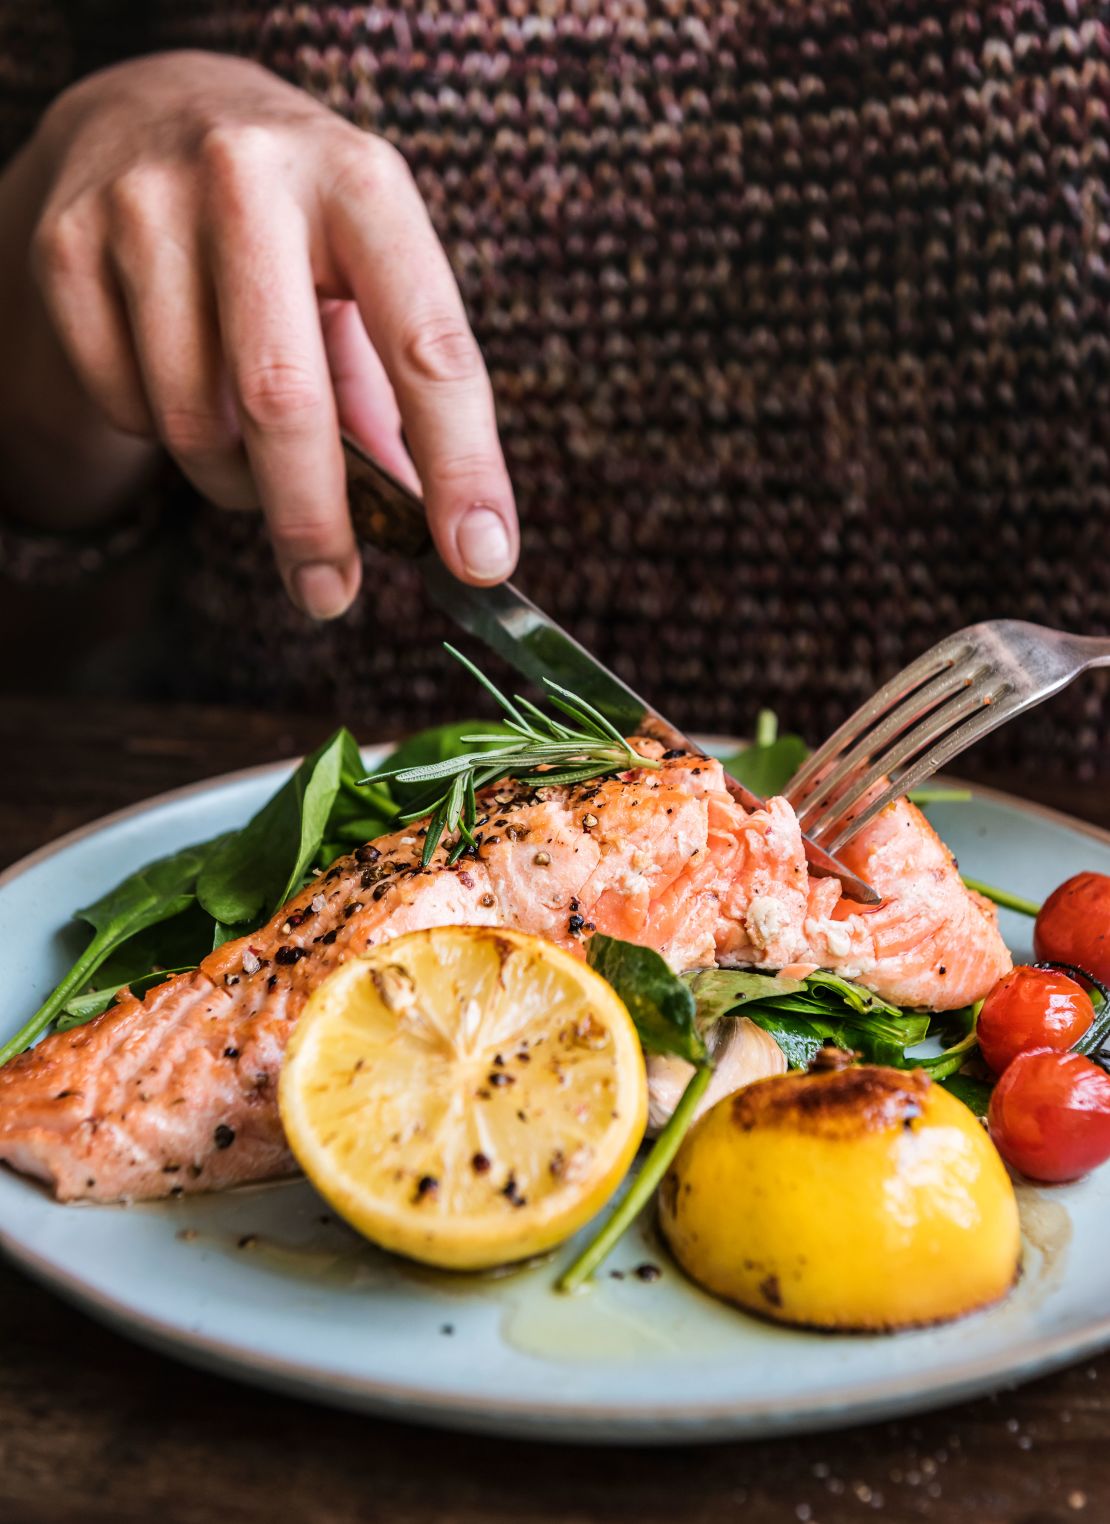 Fish like salmon are rich in healthy omega-3 fatty acids, so each serving is key to lowering your risk of heart disease.